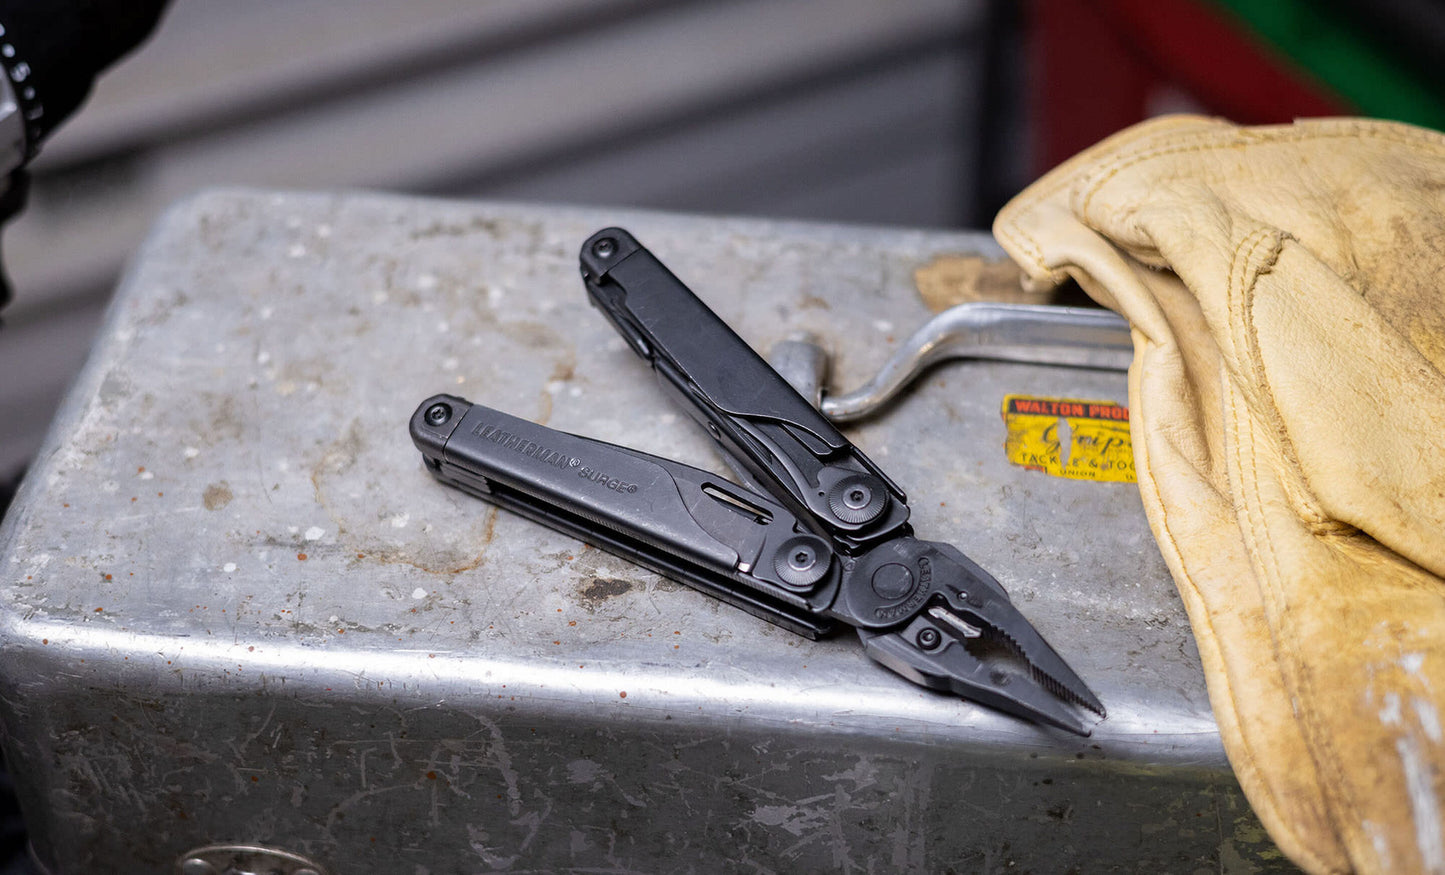 Leatherman Surge® Multi-Tool: The Powerhouse for Every Challenge